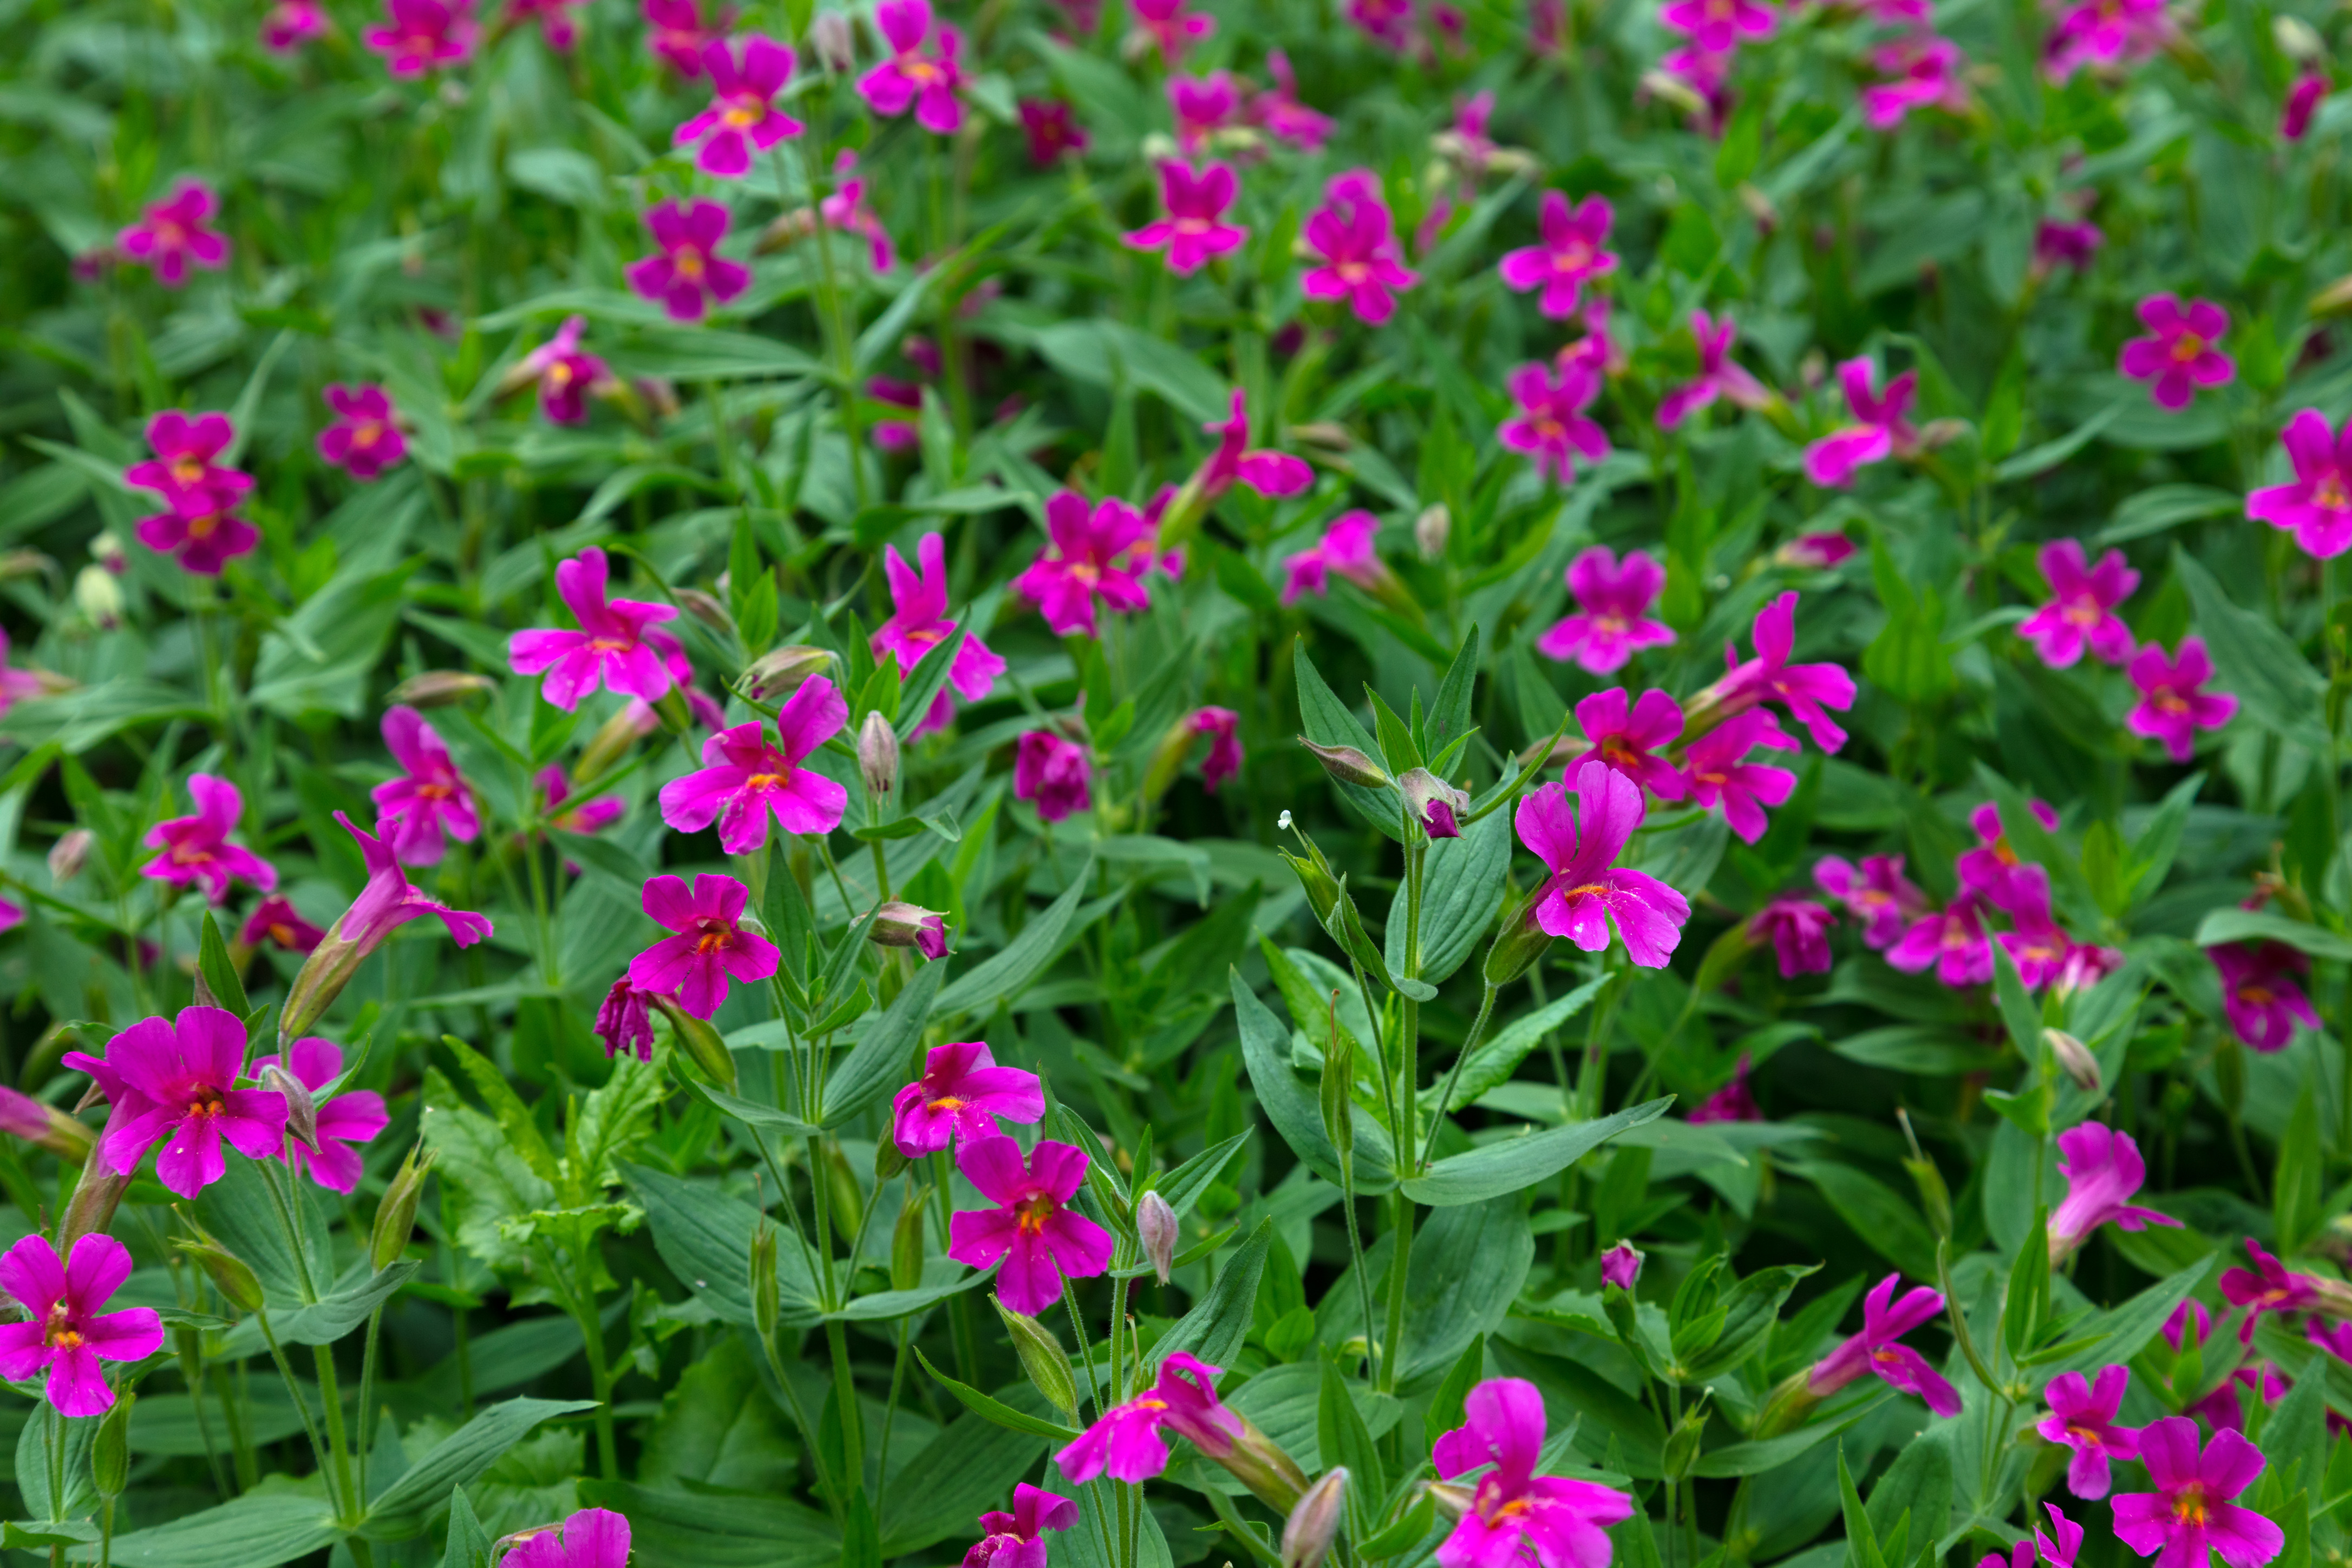 Many pink five petaled flowers with the greenery below.